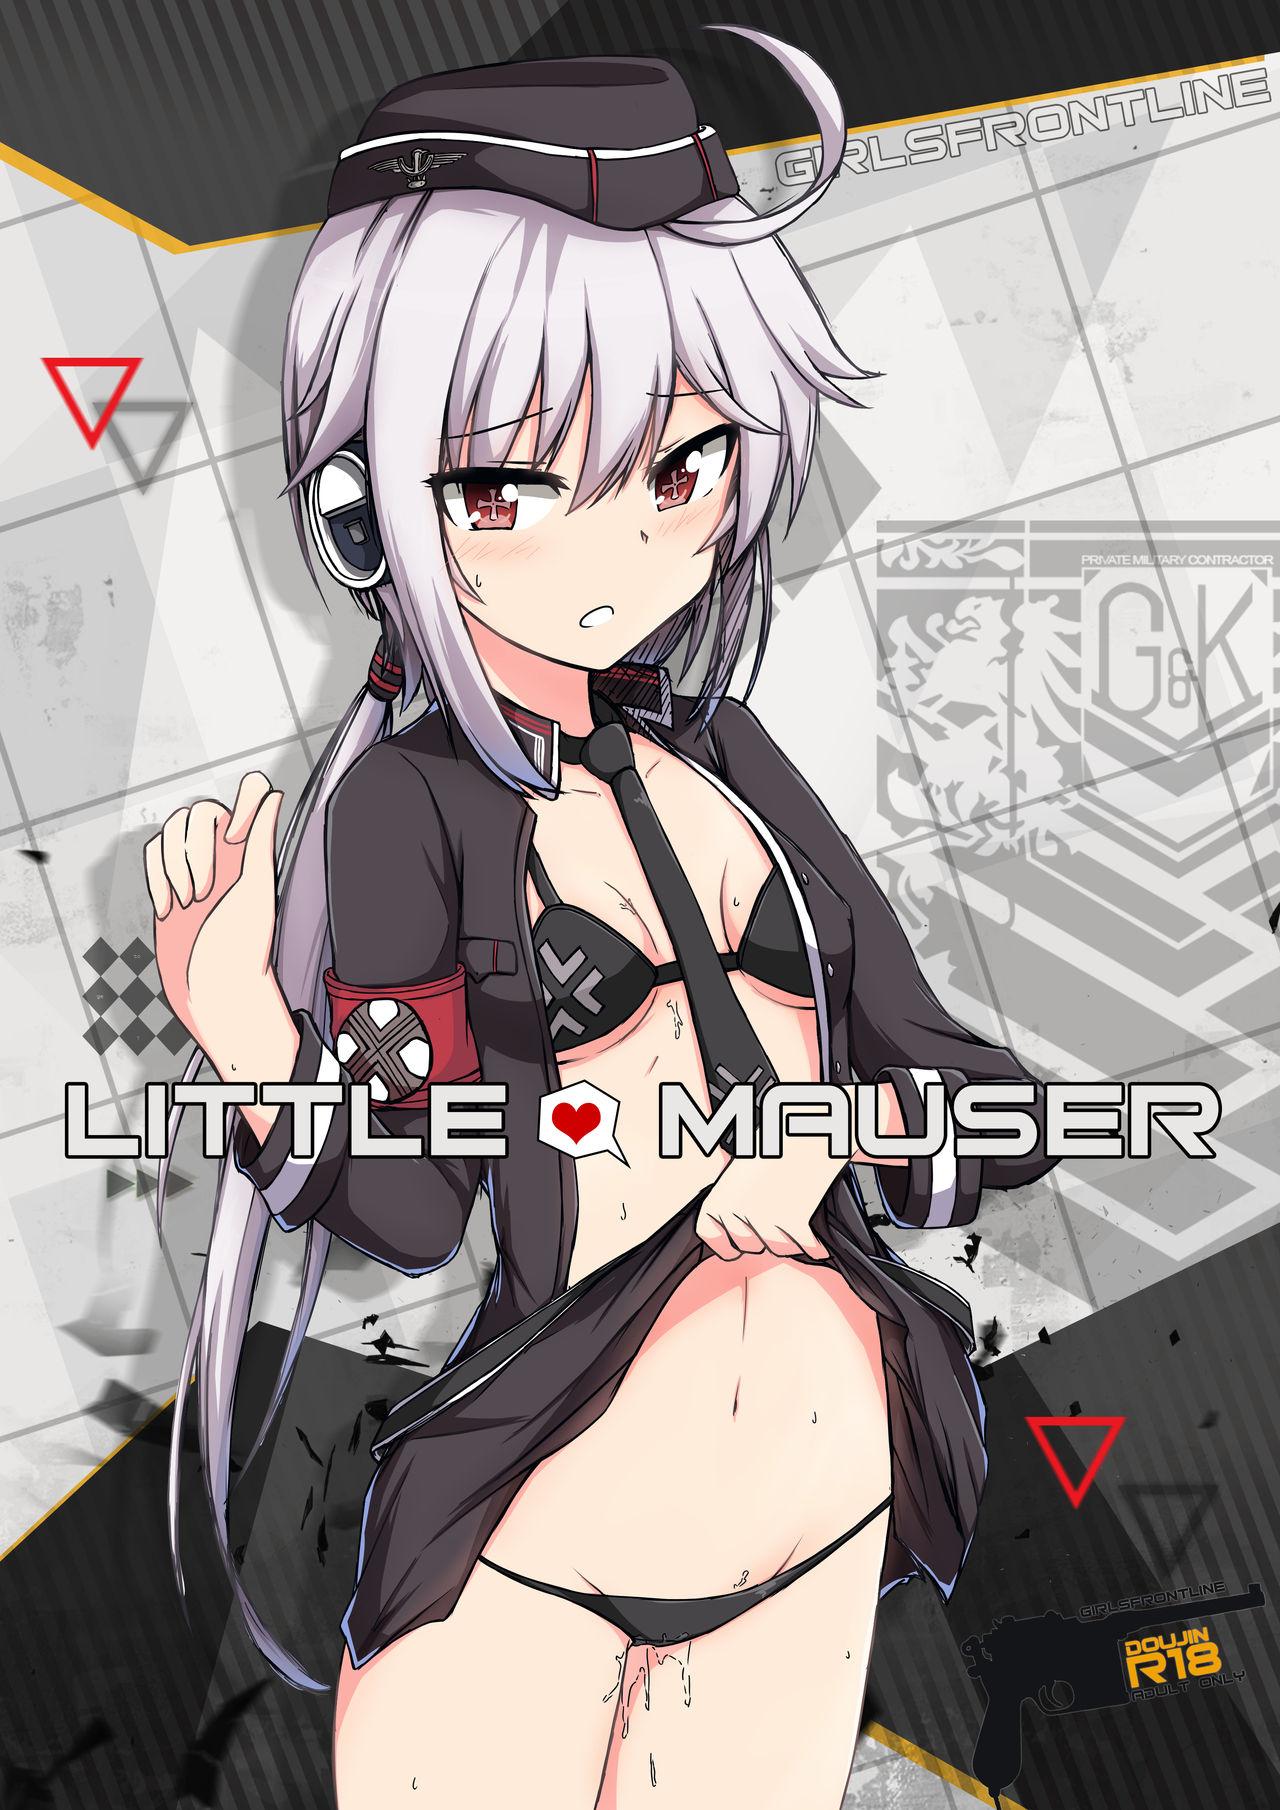 Usa Little Mauser - Girls frontline 18yearsold - Picture 1